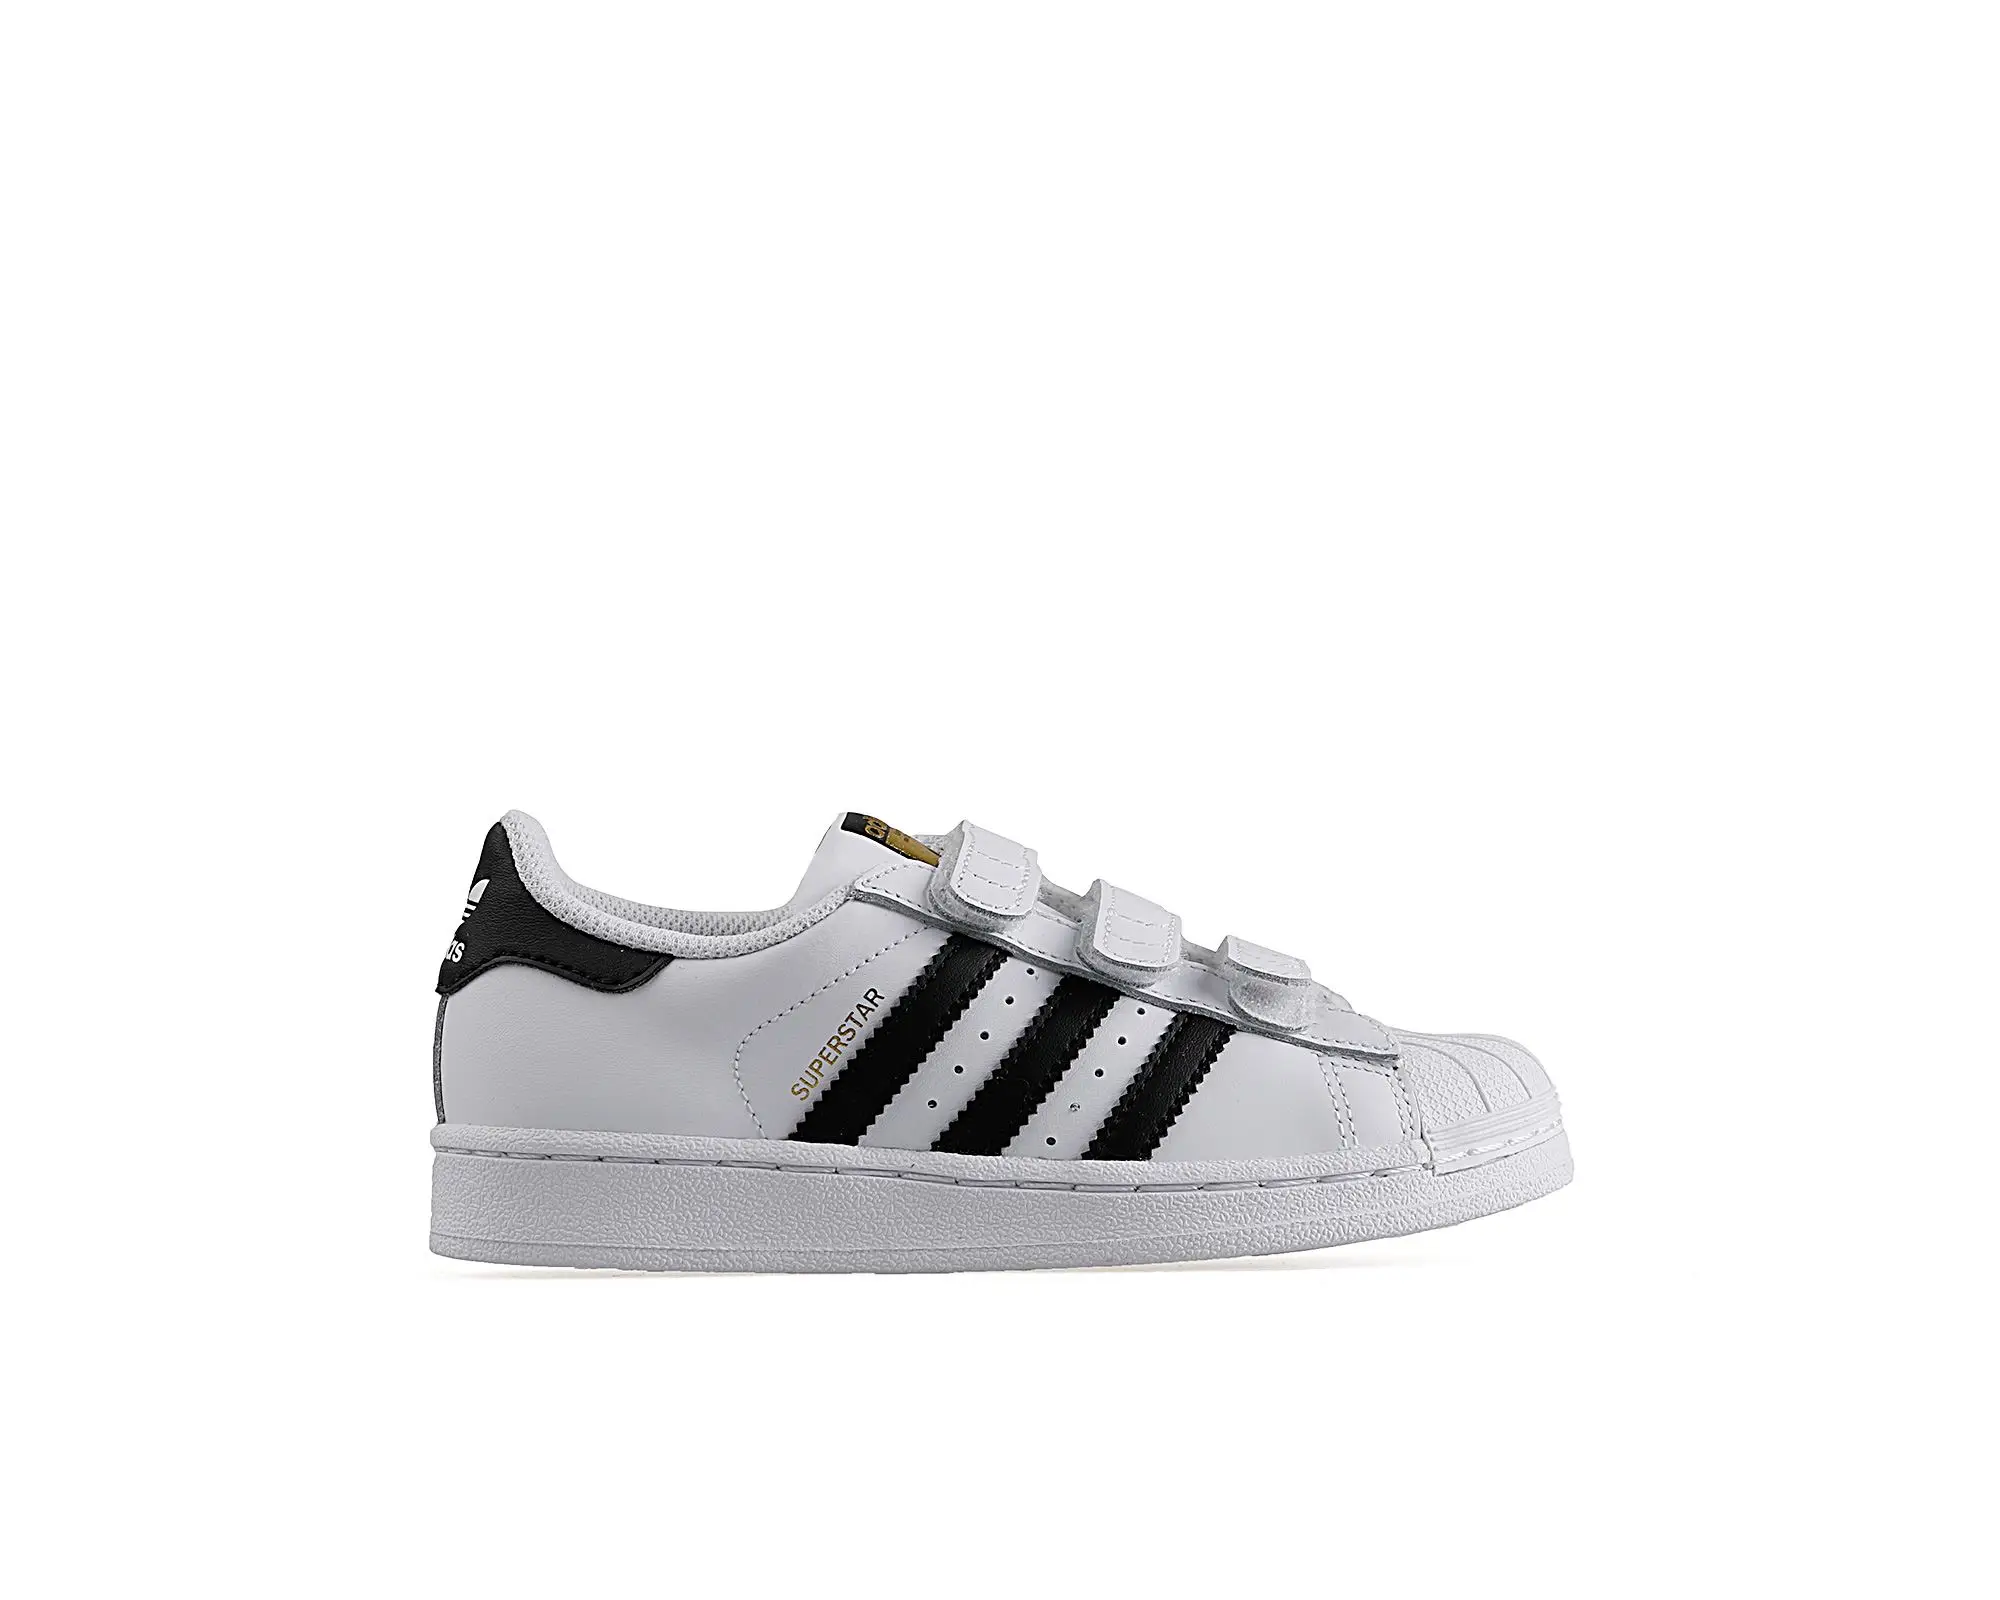 

Adidas Original Superstar Foundation White Kids Shoes Unisex Girls & Boys Casual Casual Sneakers